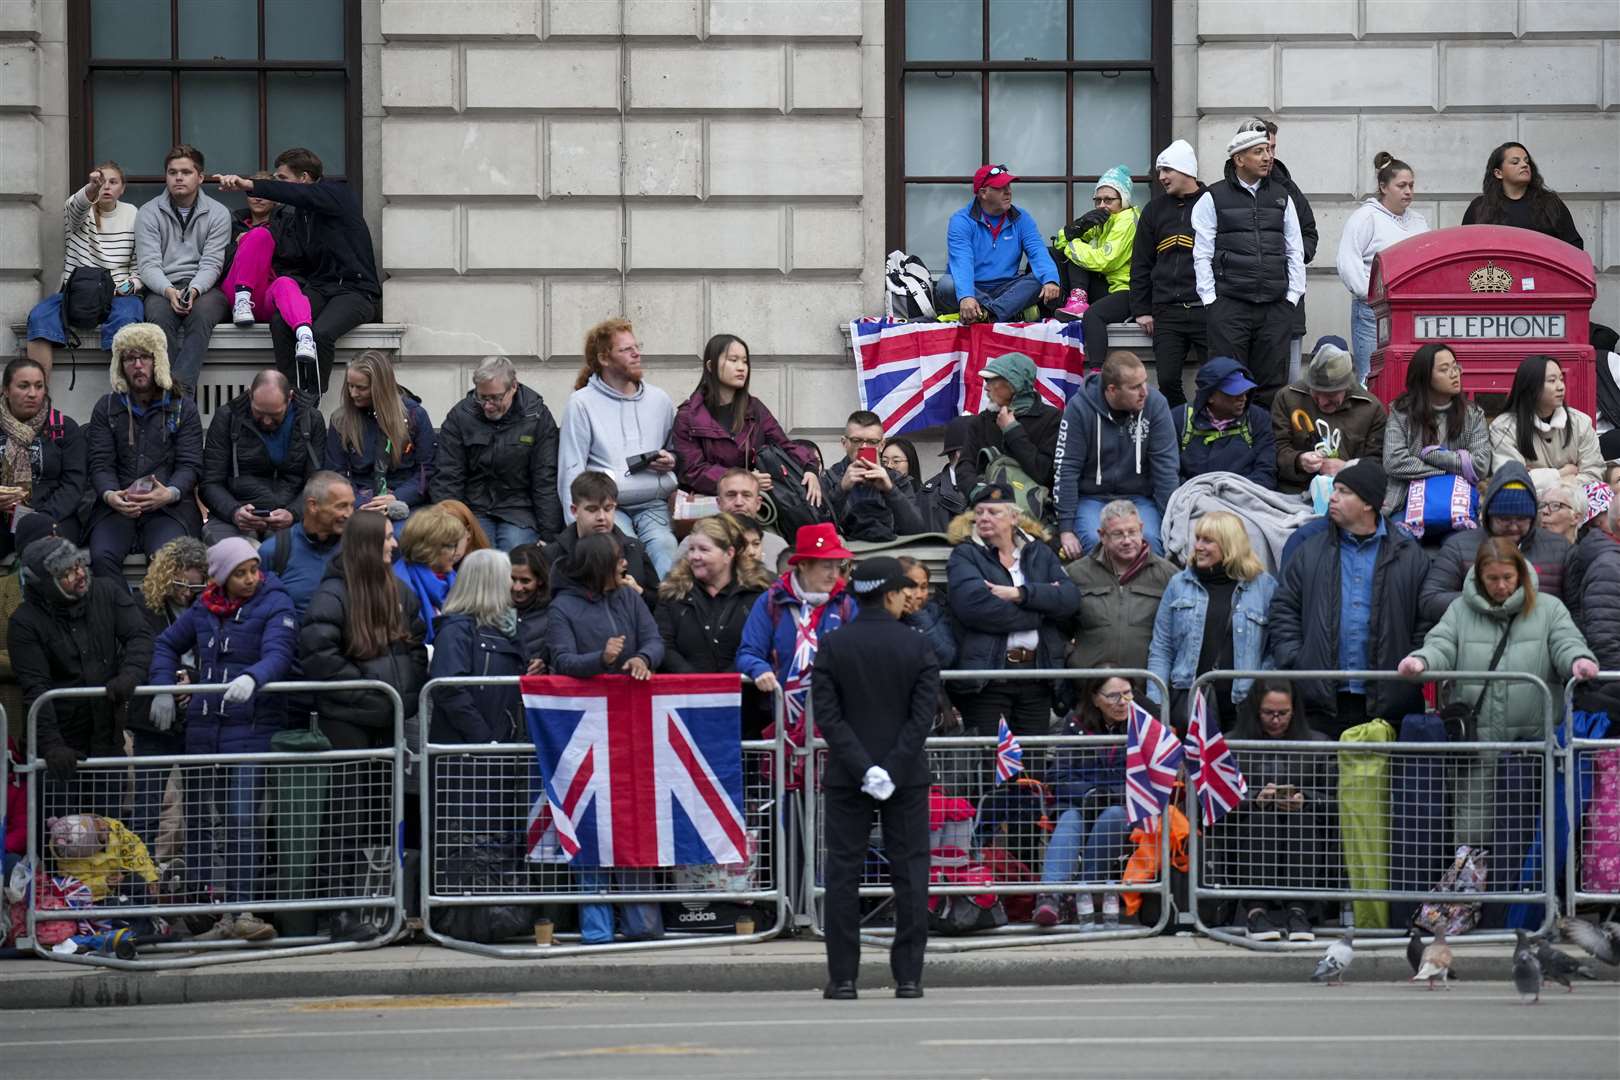 The crowd in London ahead of the State Funeral of Queen Elizabeth II. Picture: PA